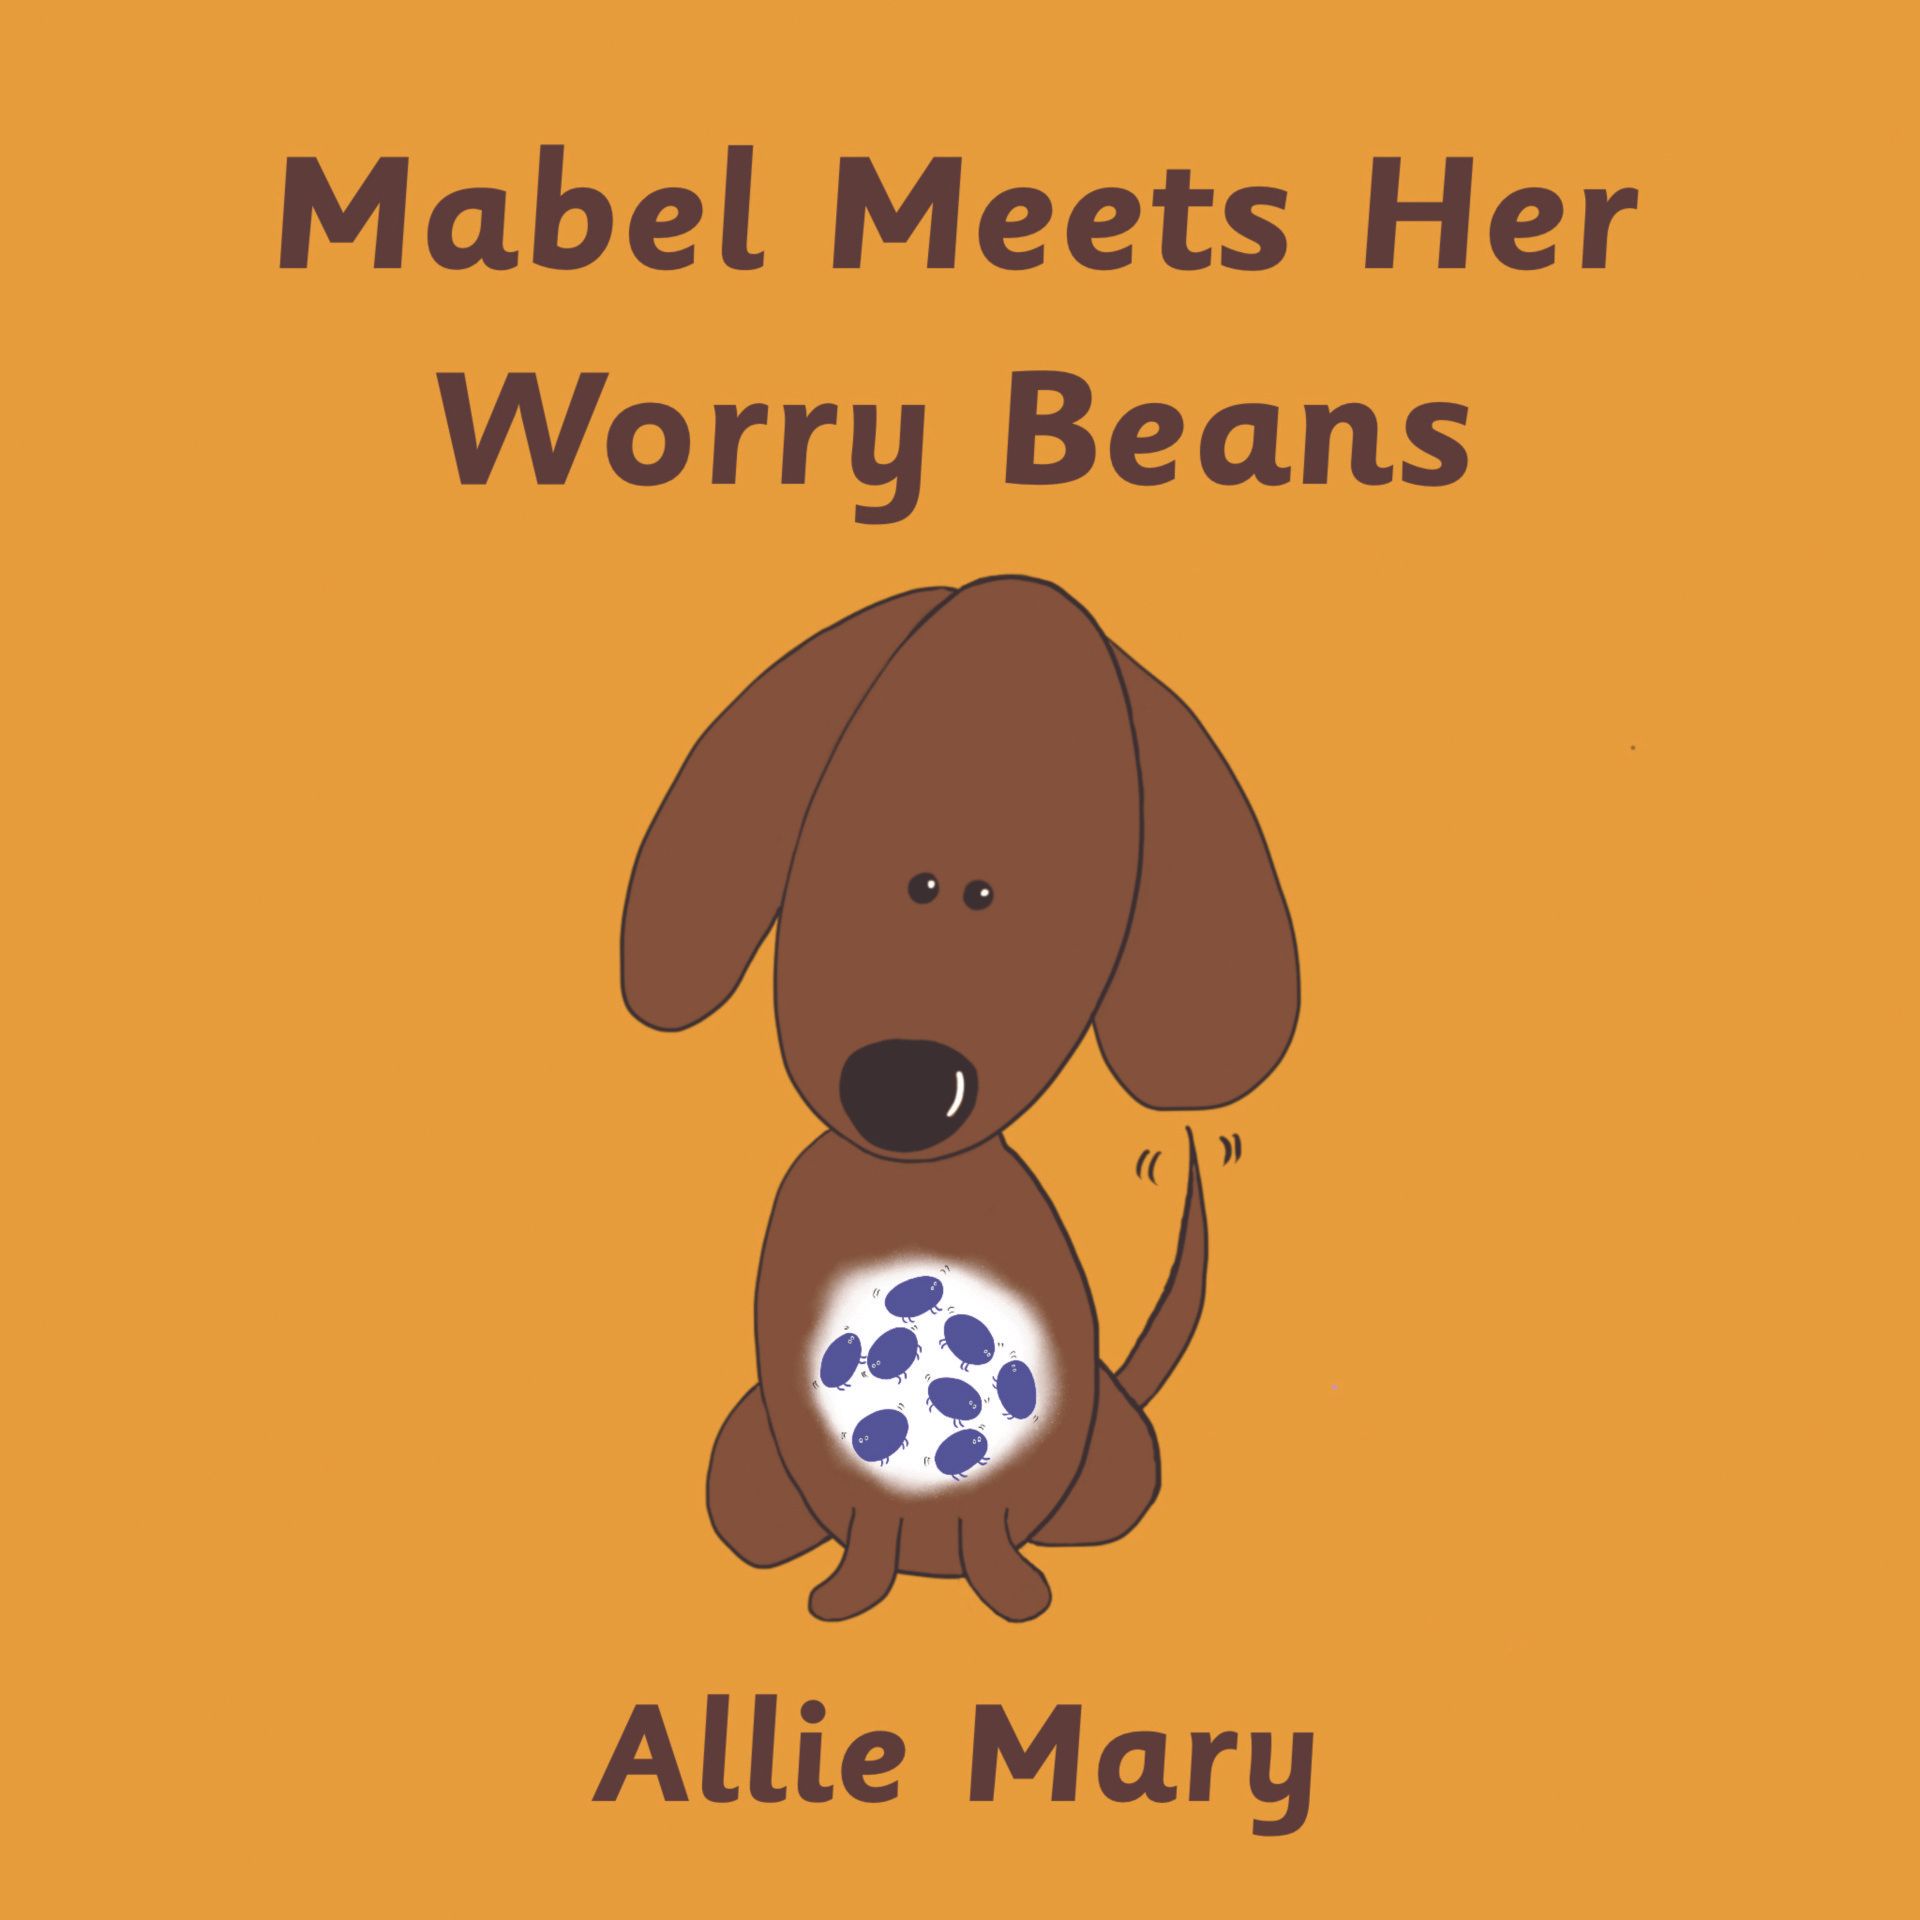 A book called mabel meets her worry beans by allie mary